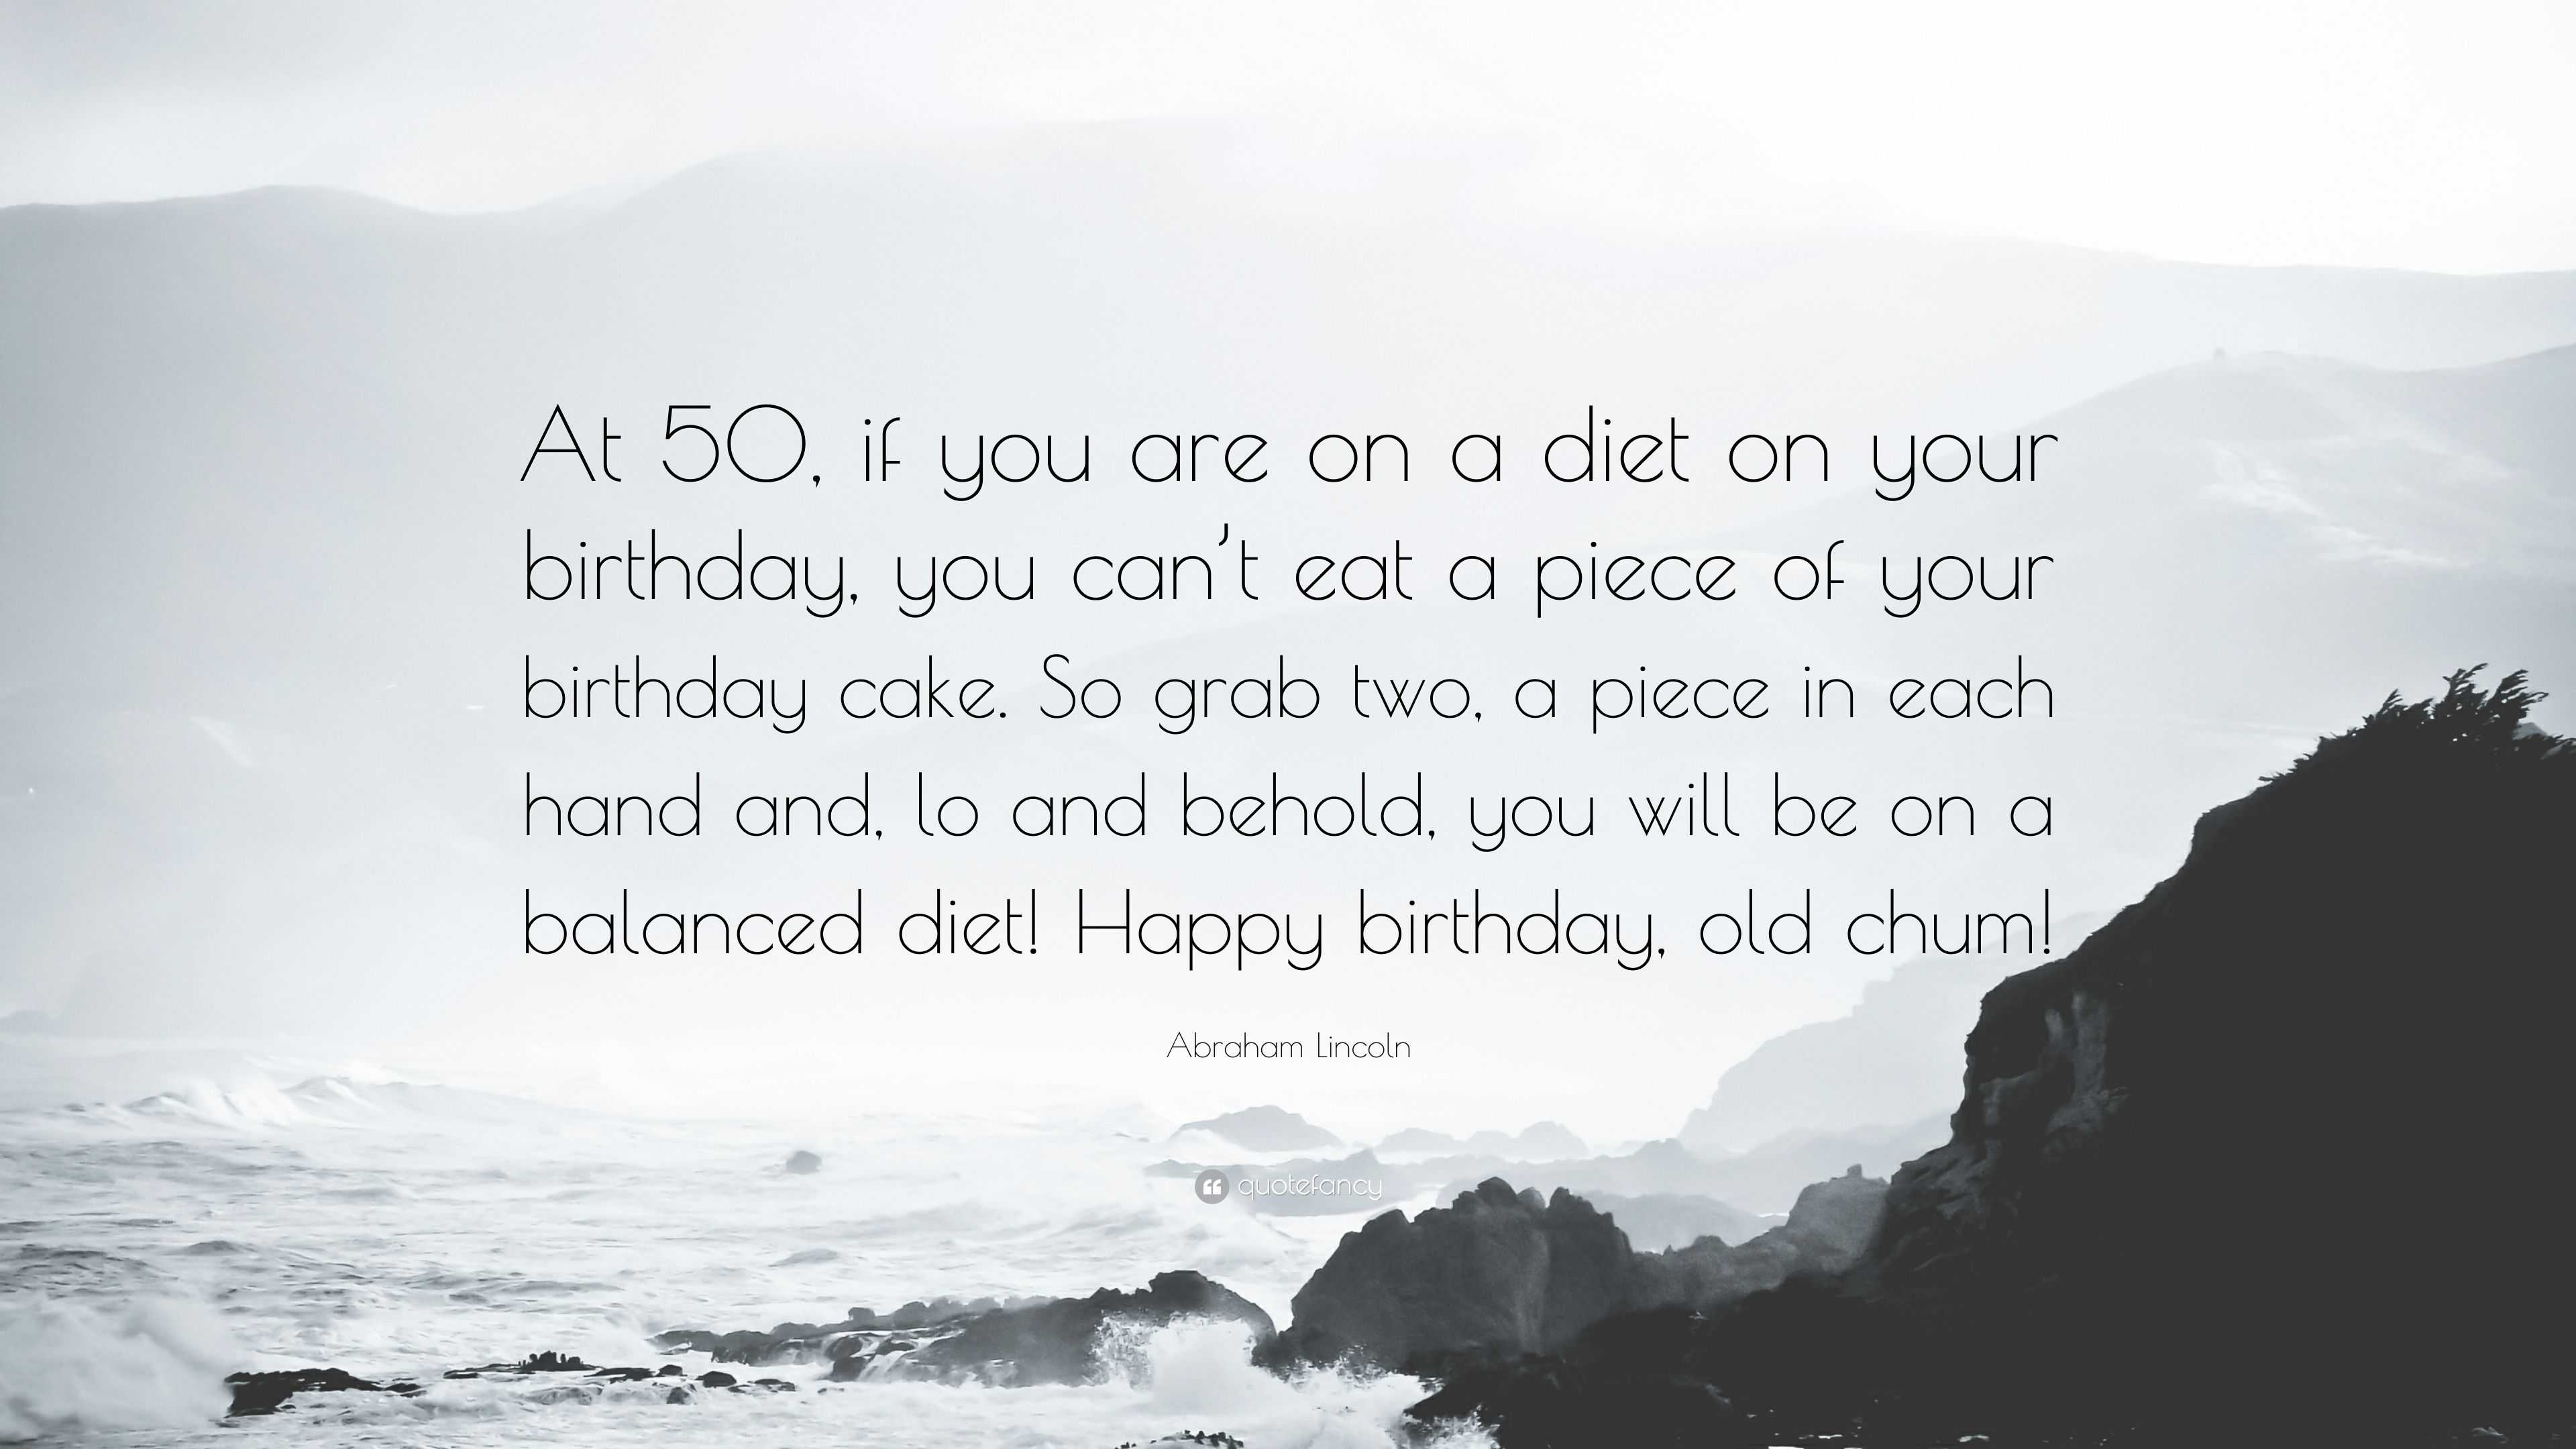 Abraham Lincoln Quote: “At 50, if you are on a diet on your birthday, you  can't eat a piece of your birthday cake. So grab two, a piece in each ...”